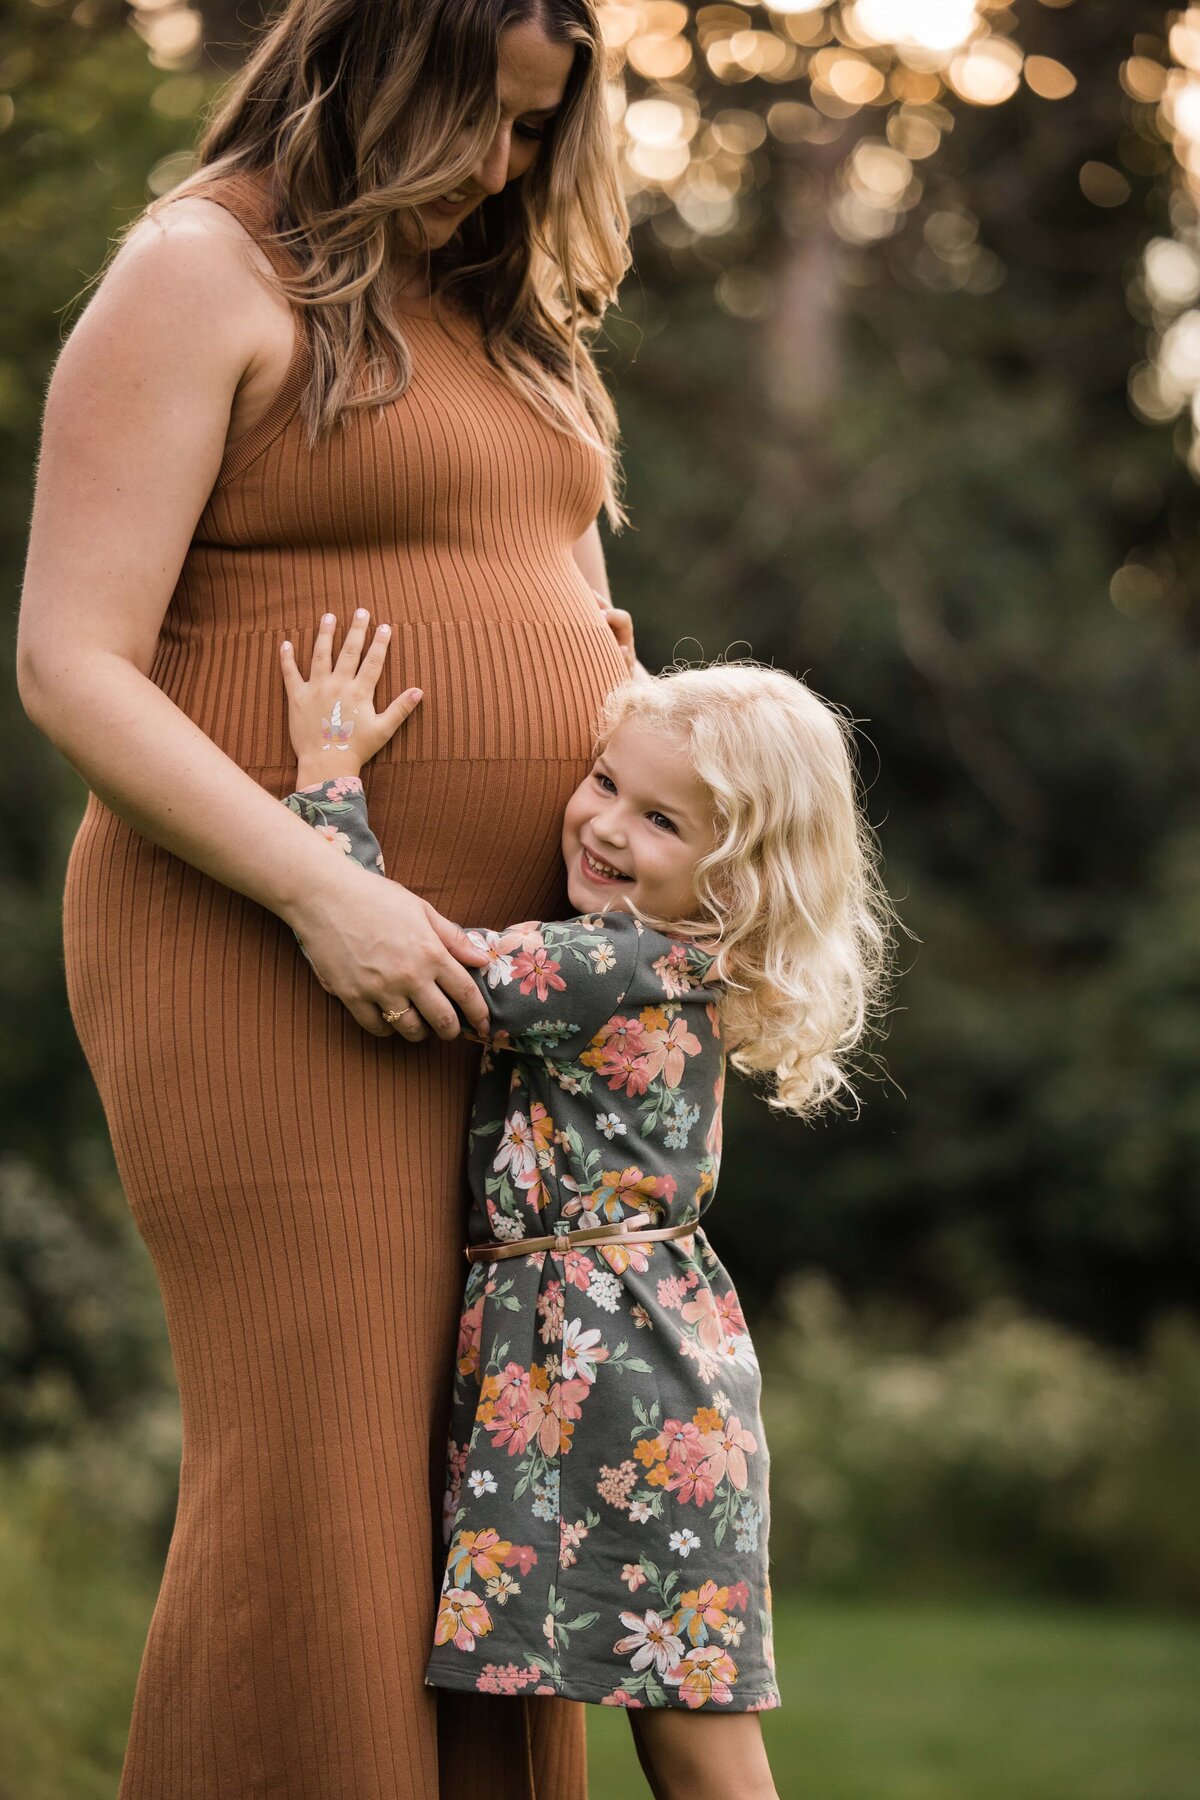 A smiling young child embraces a pregnant woman's belly in an outdoor setting, captured in a stunning piece of maternity photography.